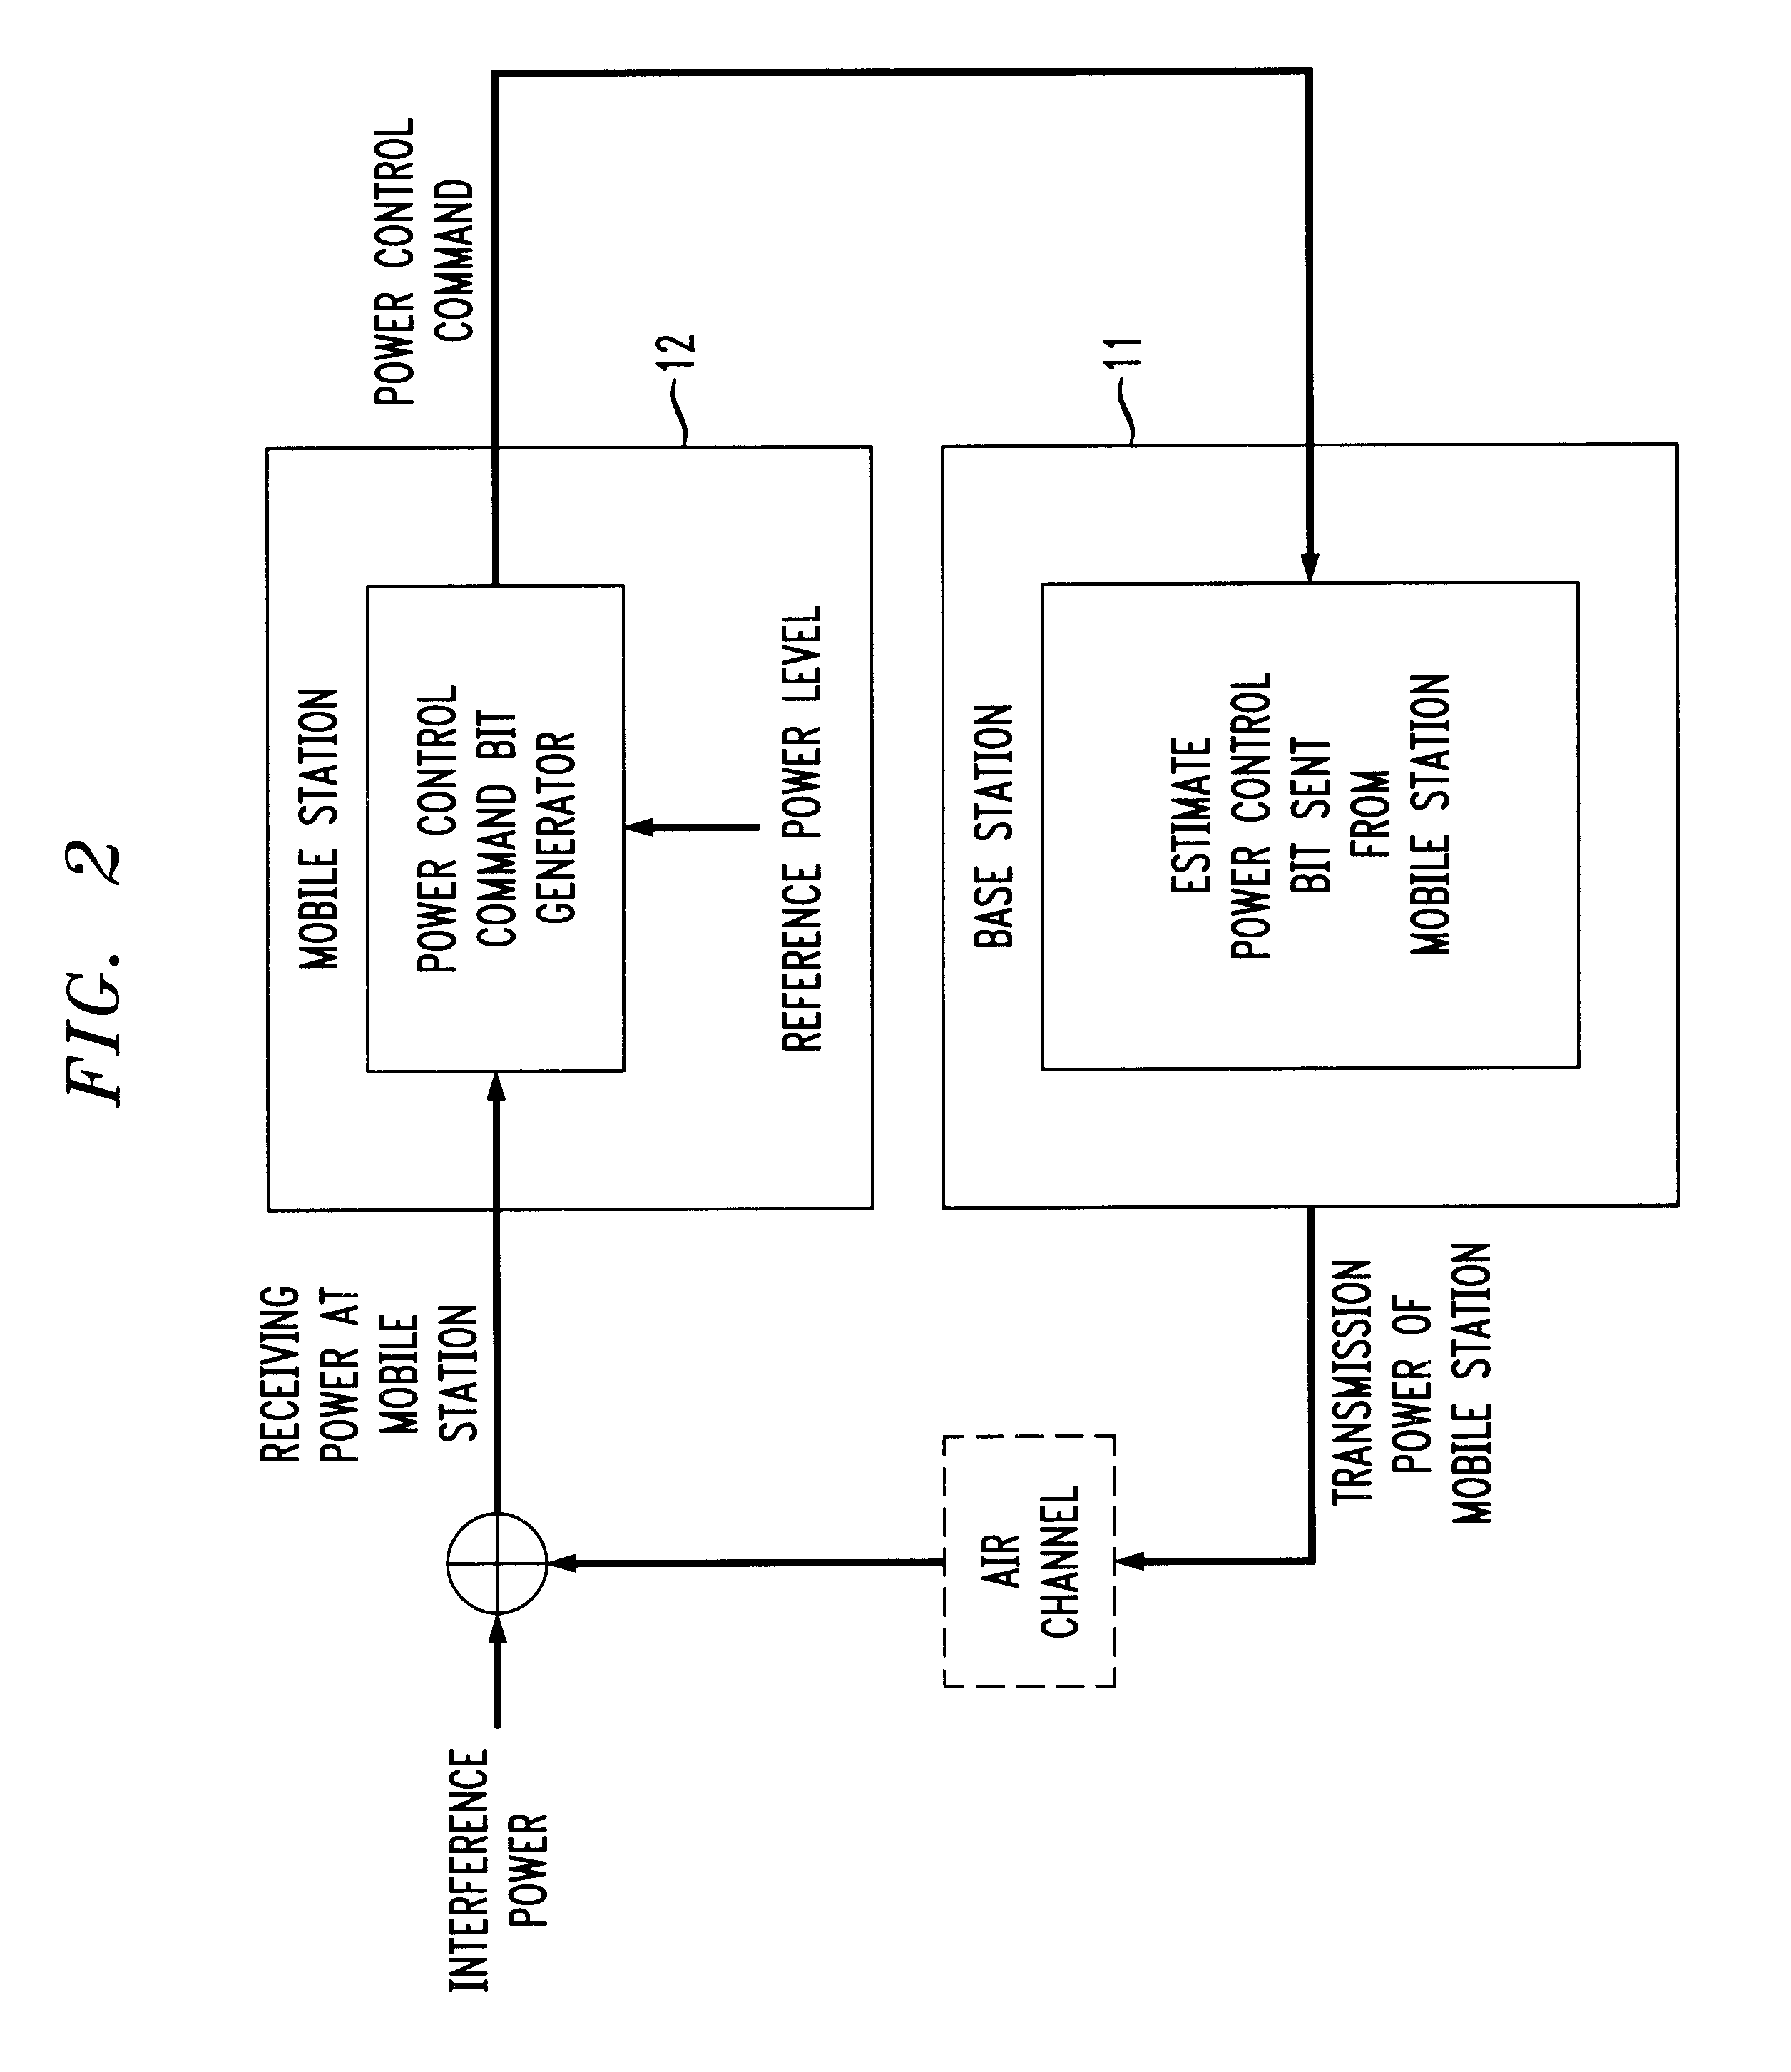 Method for detecting forward link power control bits in a communication system